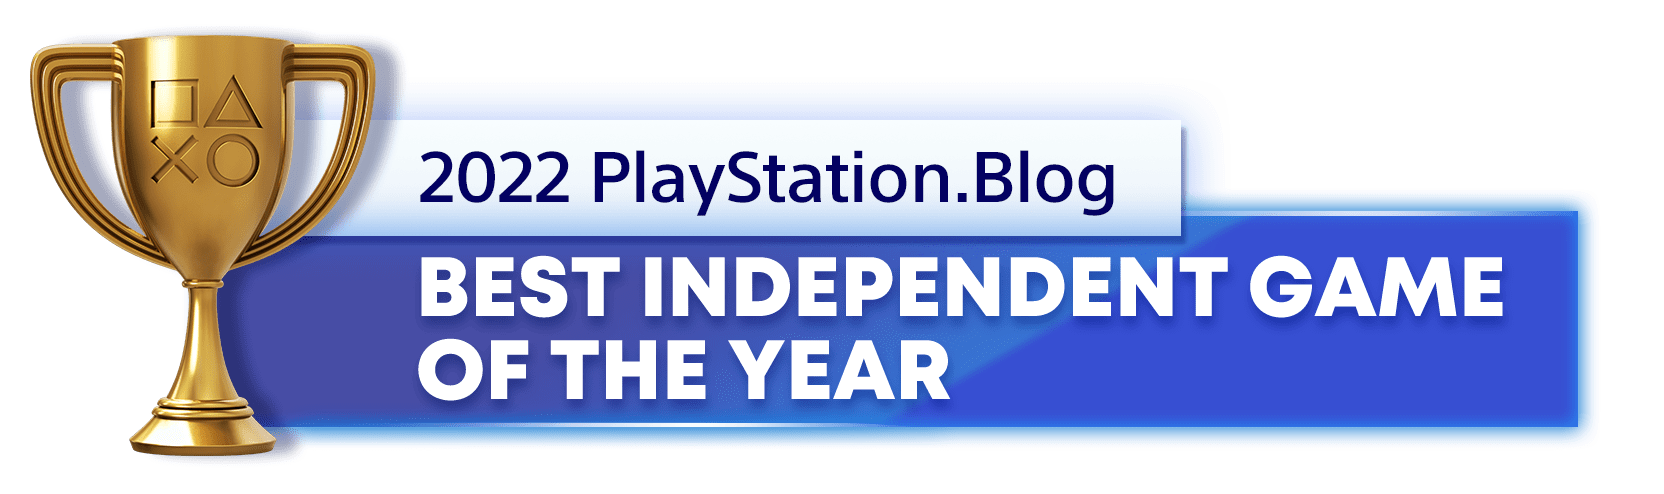 TrueAchievements Game of the Year Awards 2022 results